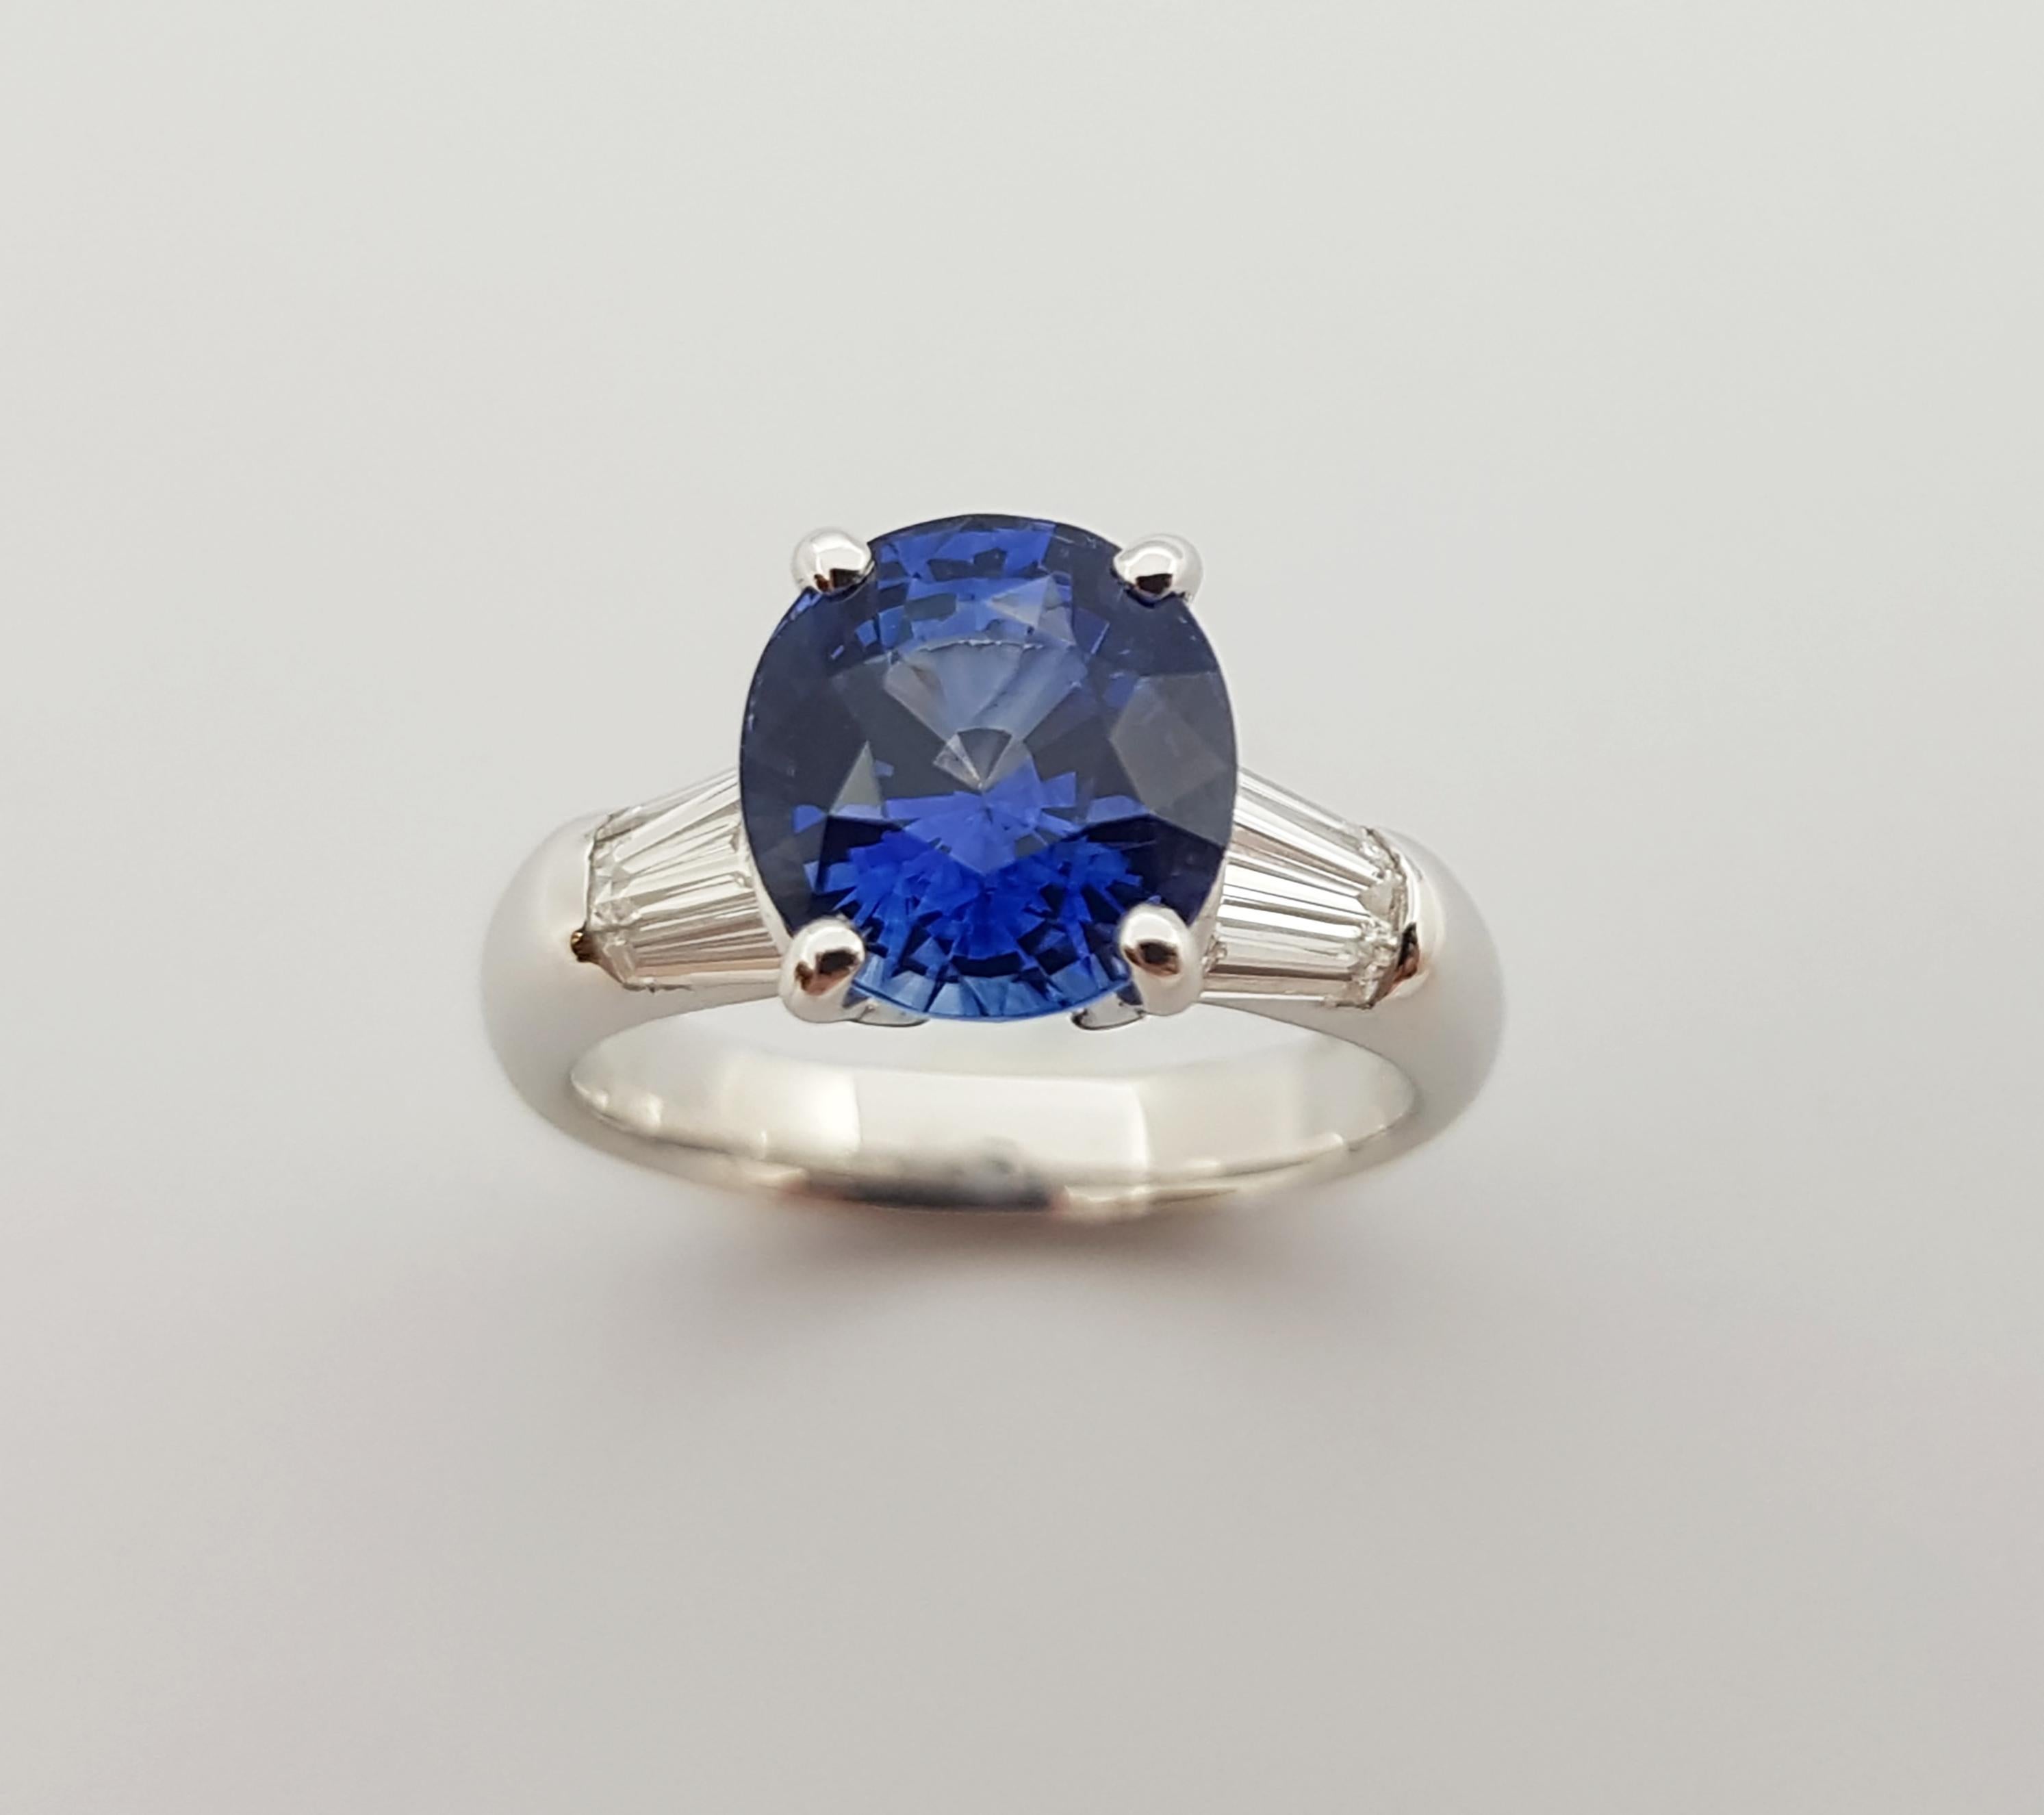 GIA Certified 3 Cts Blue Sapphire with Diamond Ring Set in 18 Karat White Gold For Sale 4